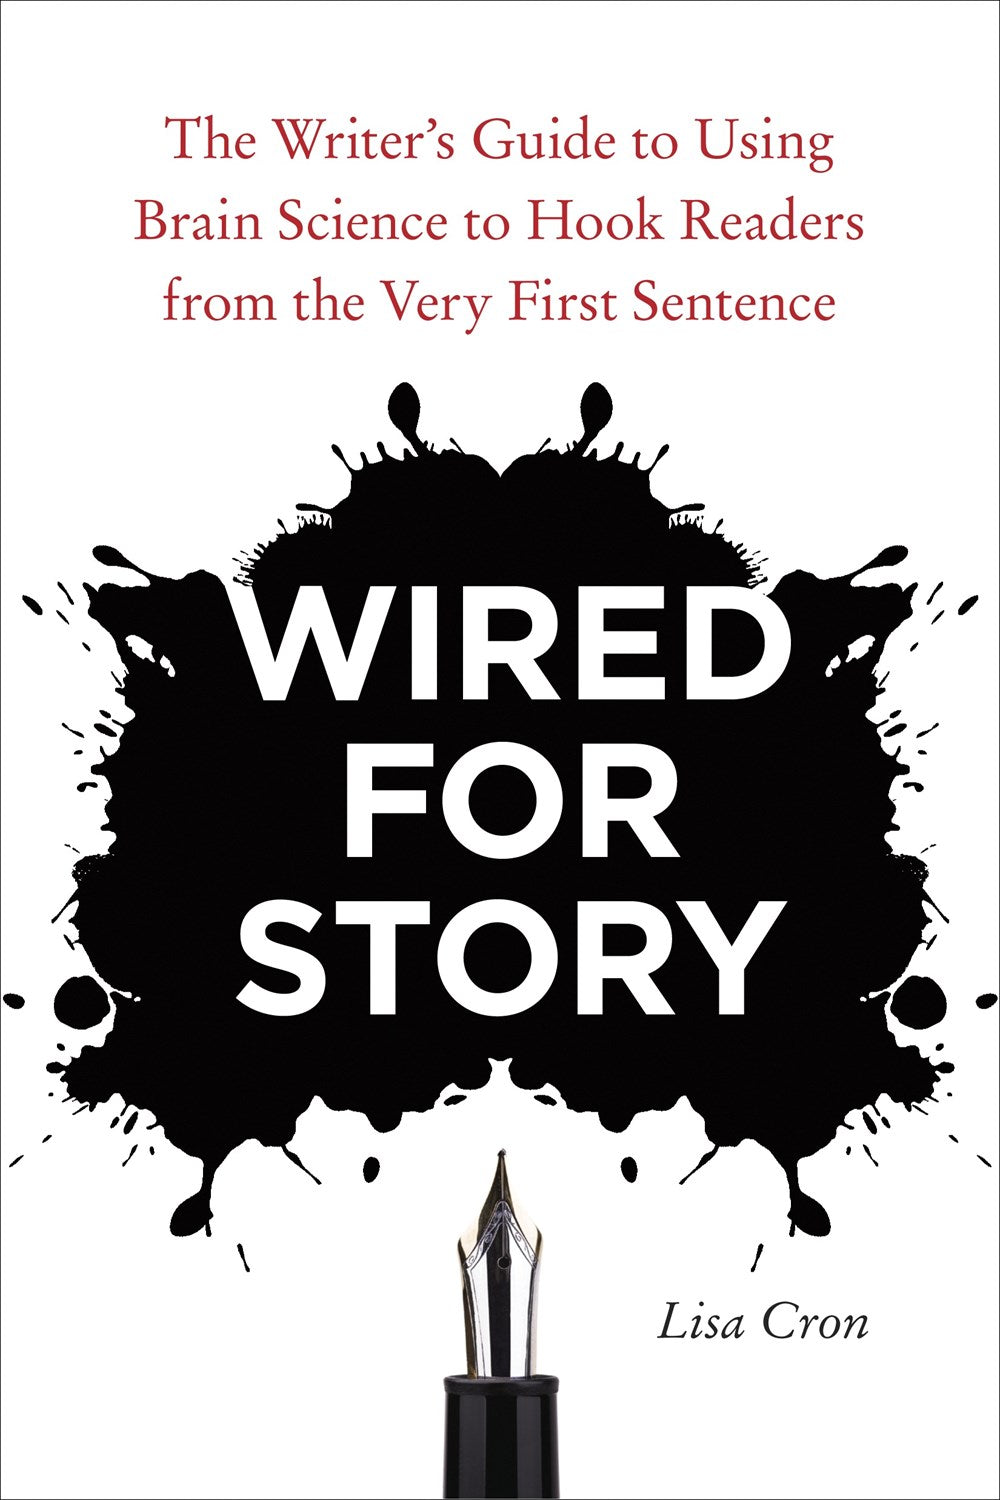 Wired for Story: The Writer's Guide to Using Brain Science to Hook Readers from the Very First Sentence by Lisa Cron